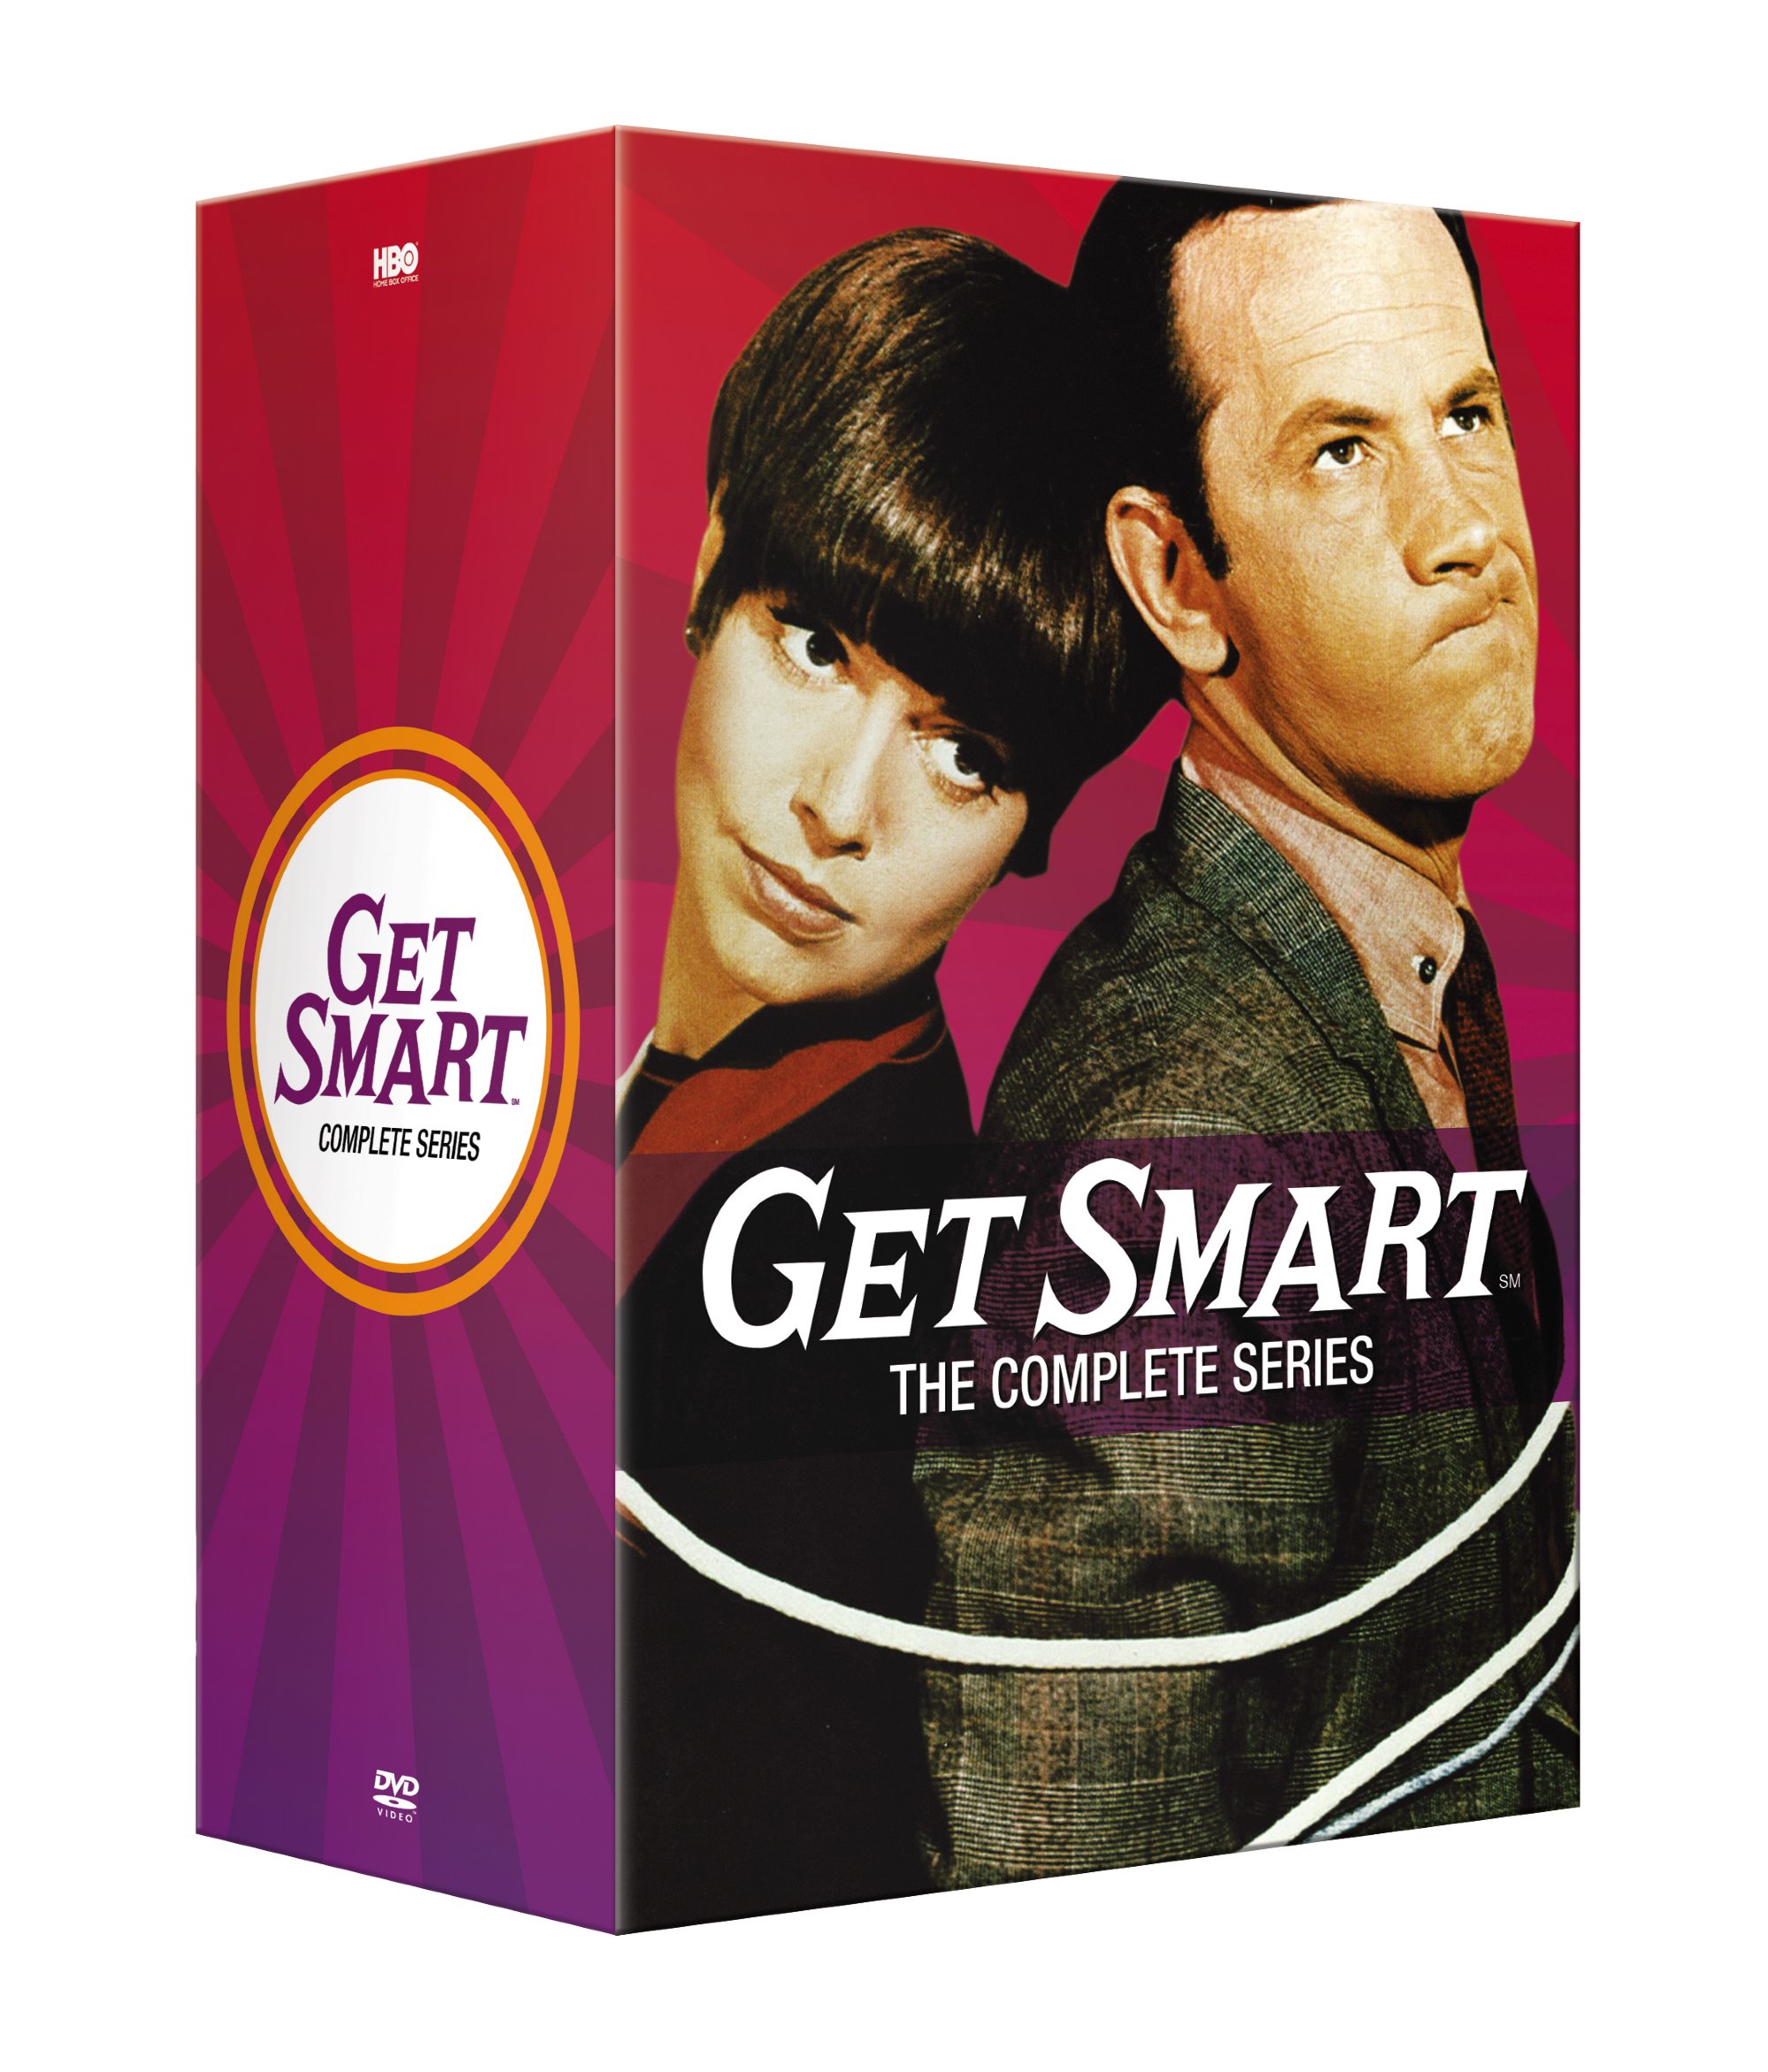 Get Smart: The Complete Series (Box Set) - DVD [ 1970 ]  - Comedy Television On DVD - TV Shows On GRUV